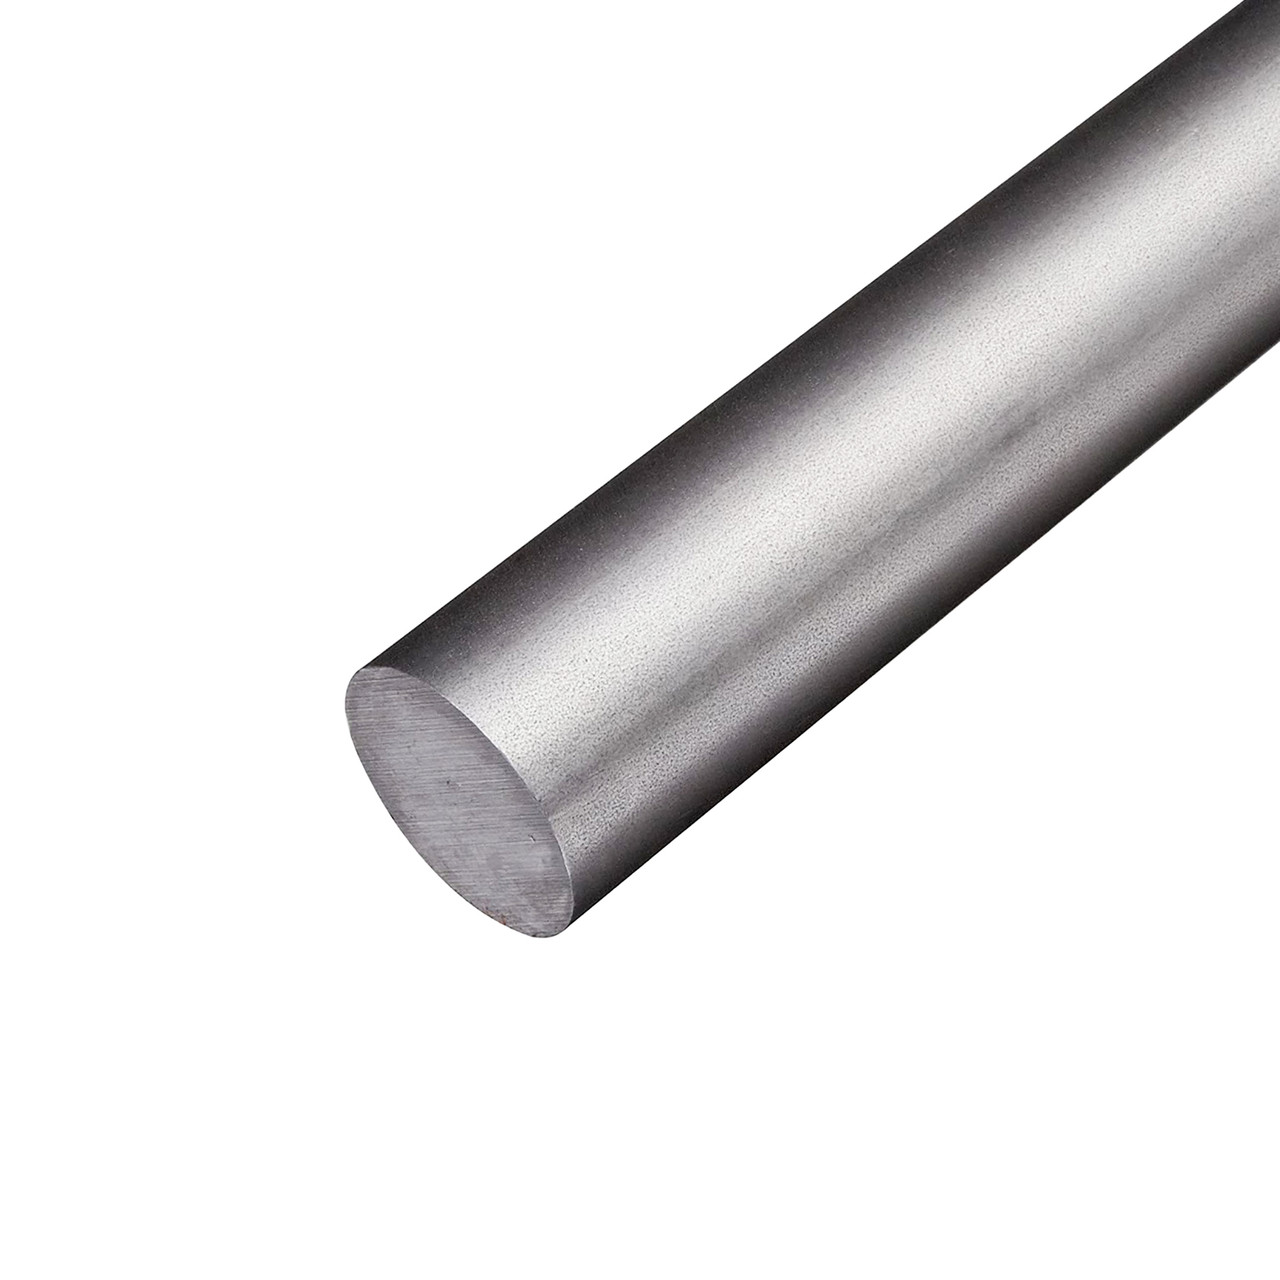 0.687 (11/16 inch) x 12 inches, 8620 Alloy Steel Round Rod, Cold Finished